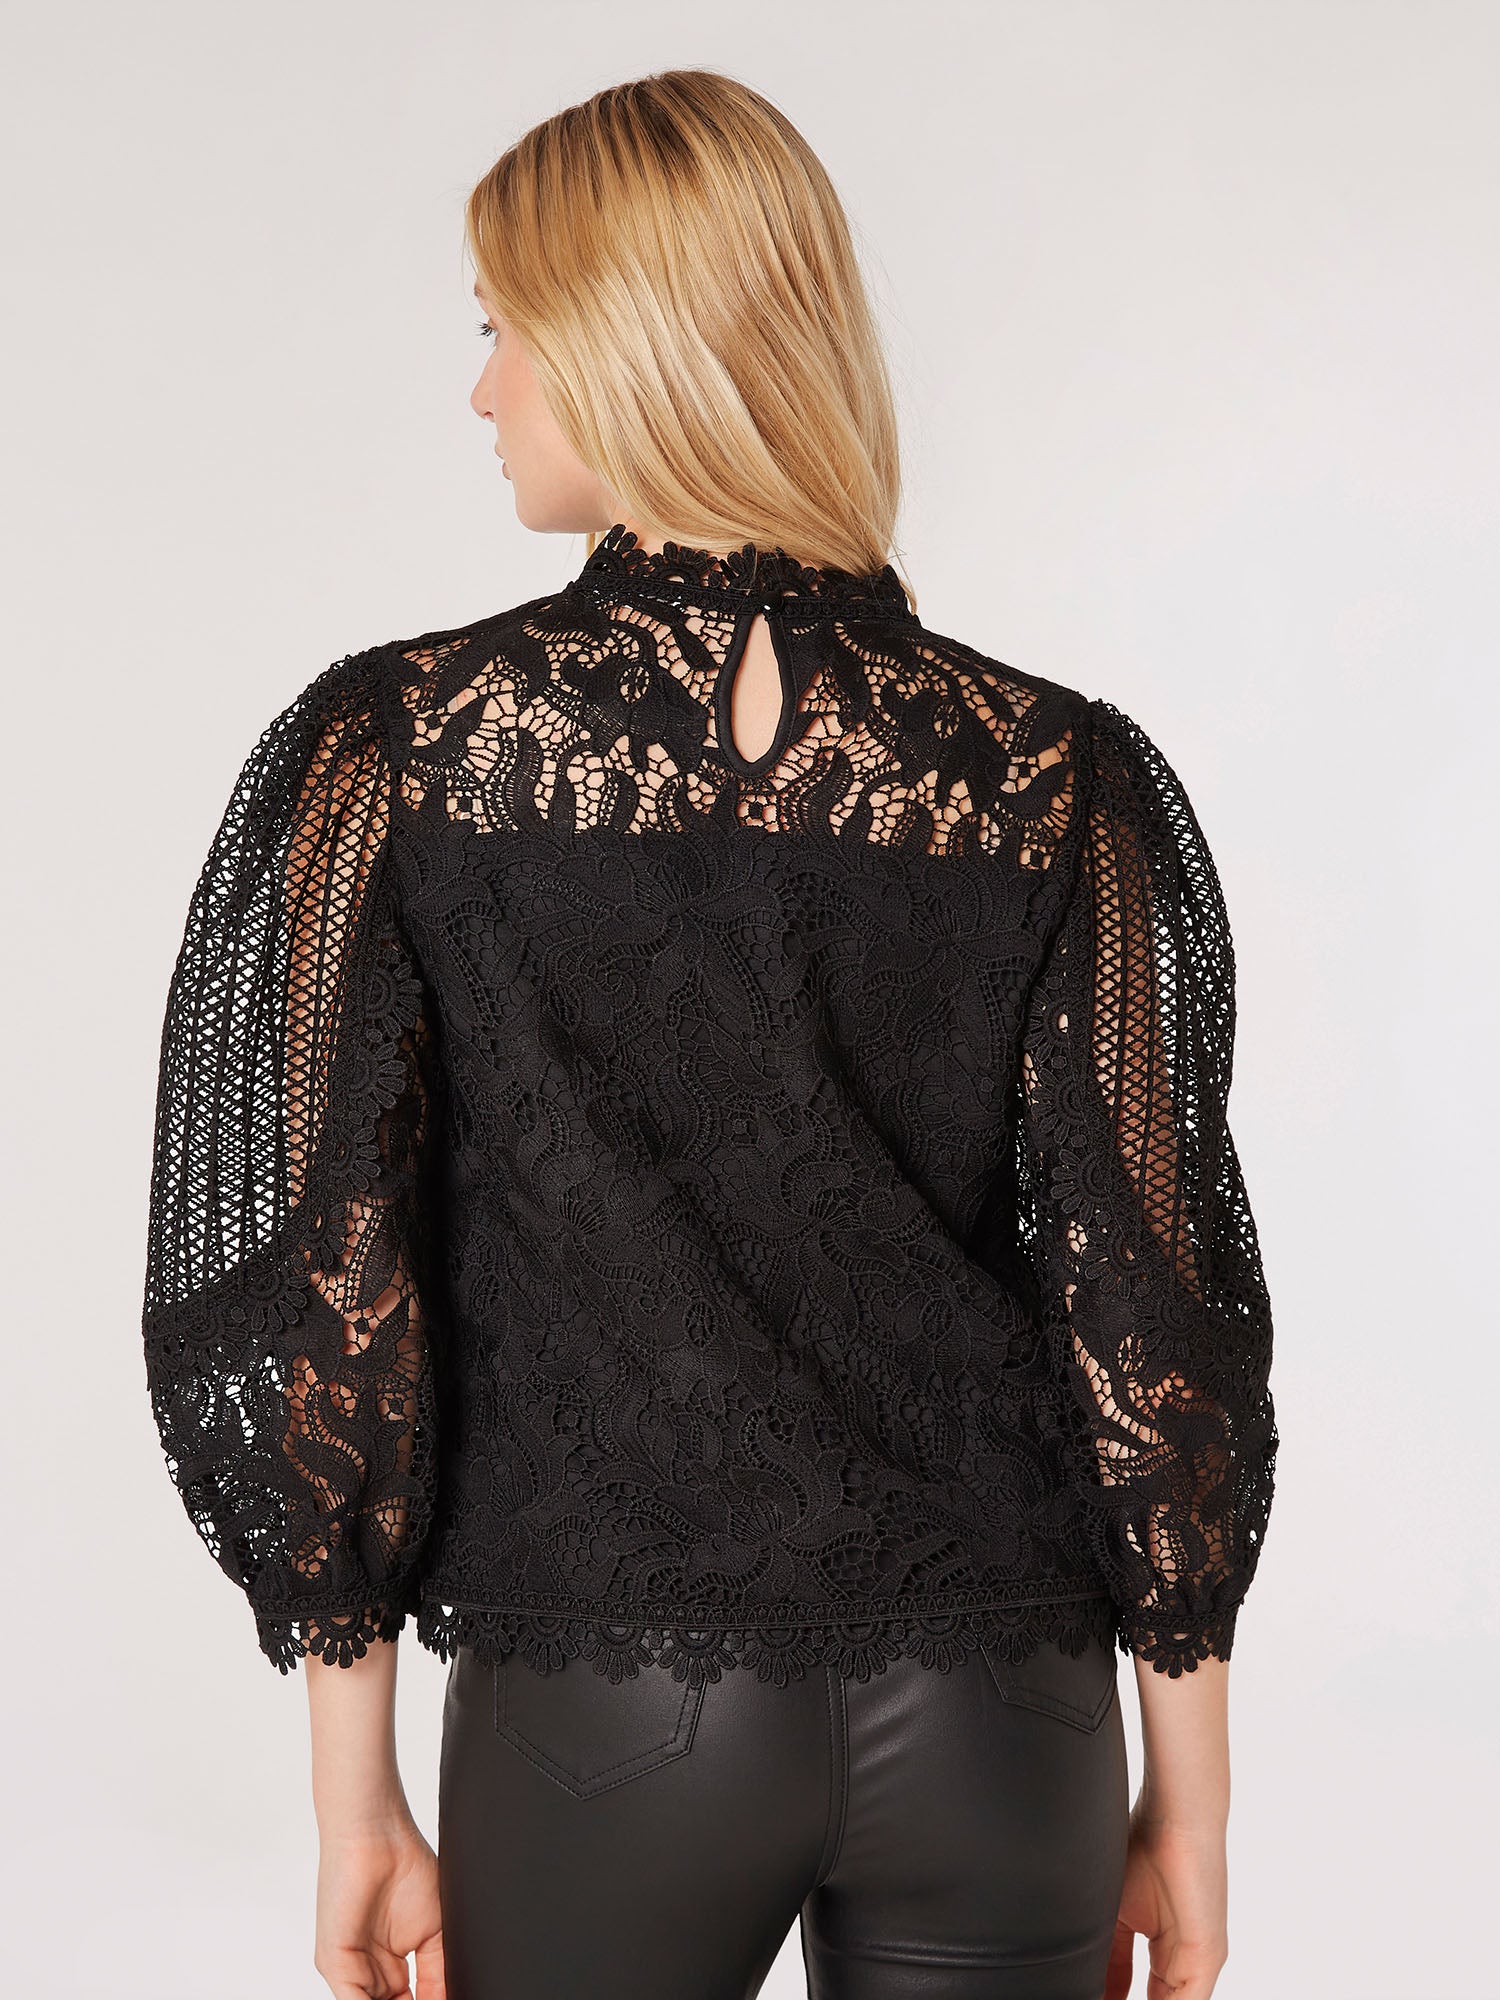 Victoriana Mixed Lace Top in Black